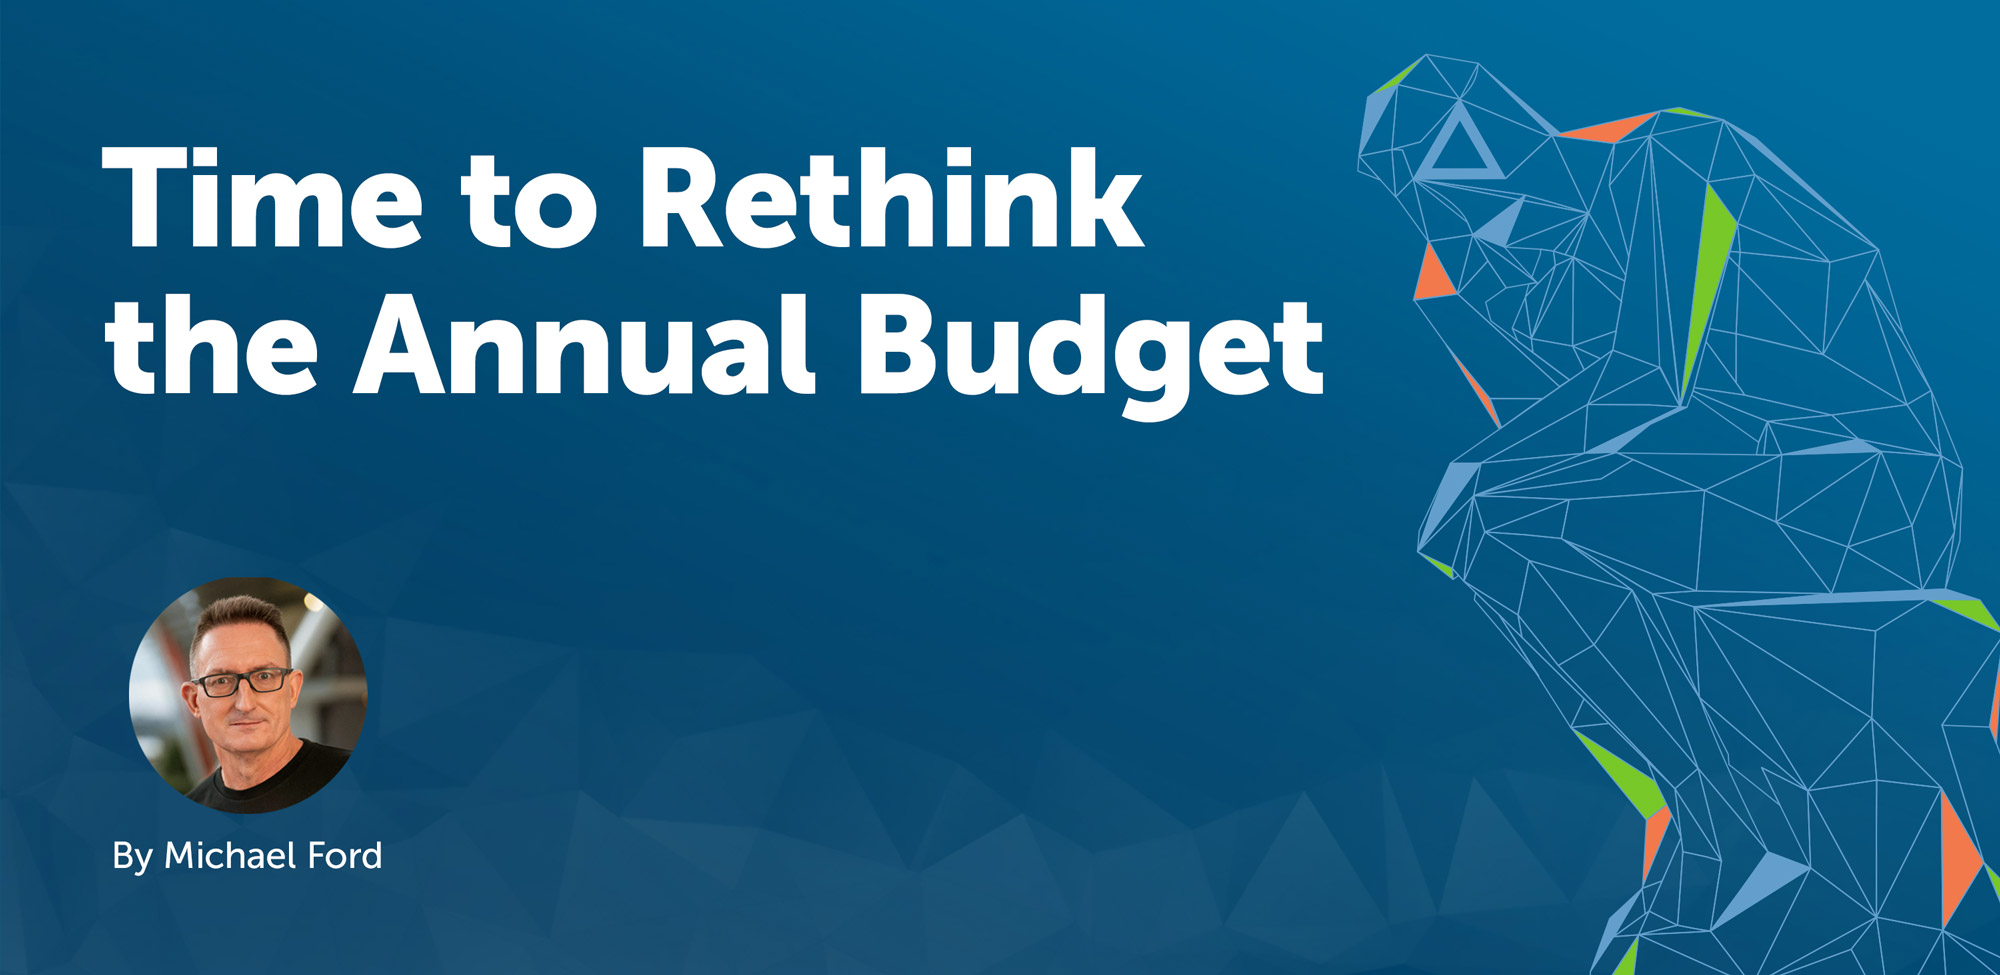 Time to rethink the annual budget